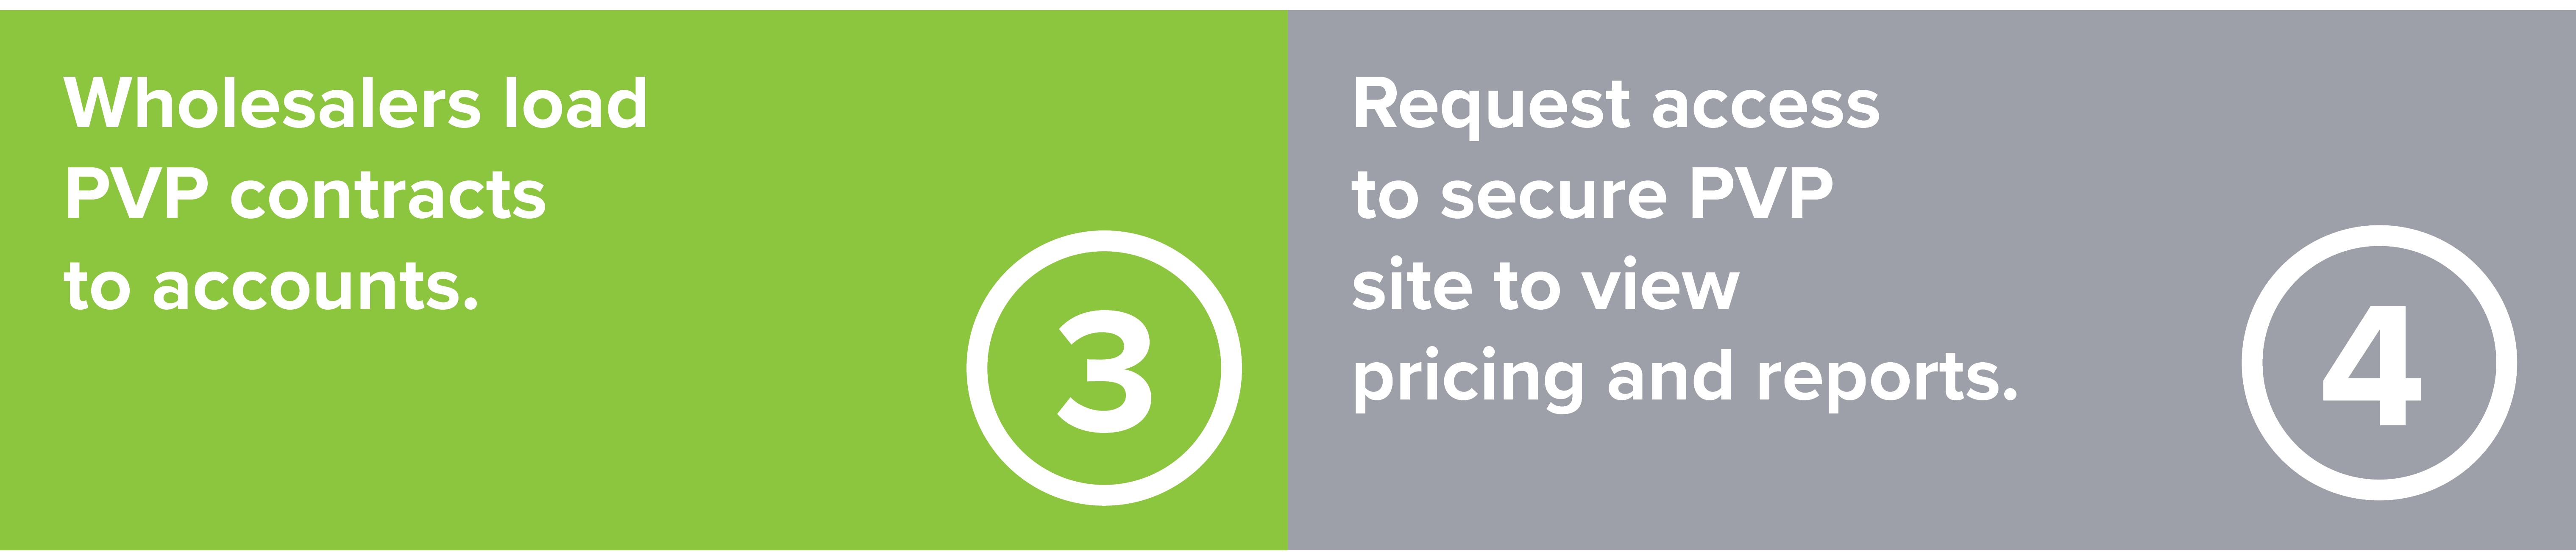 Step 3: Wholesalers load PVP contracts to accounts. Step 4: Request access to secure PVP site to view pricing and reports